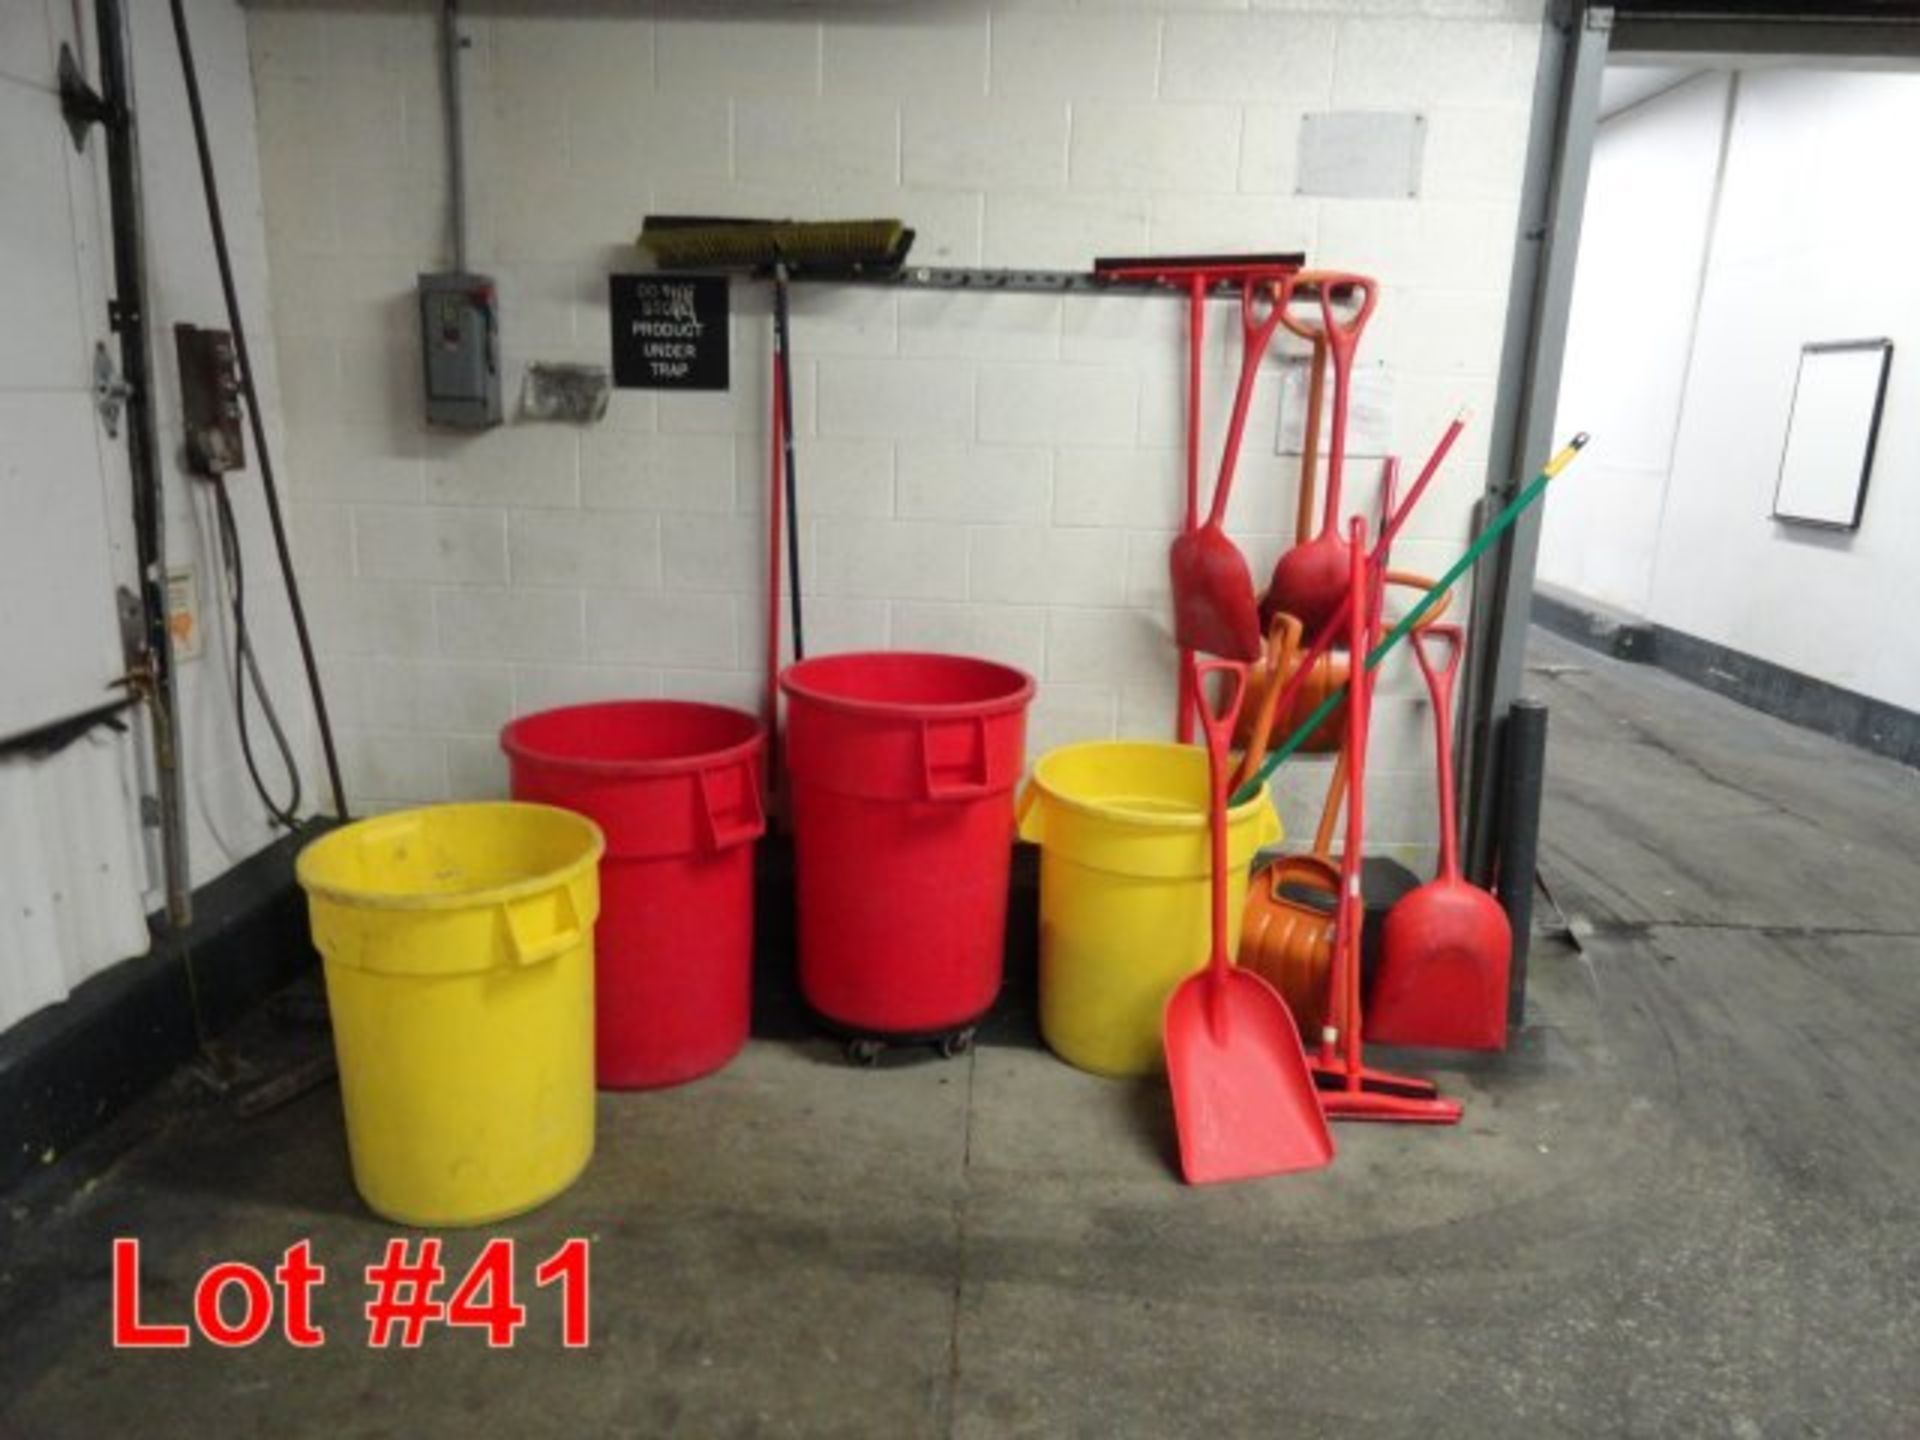 MISC. LOT: PLASTIC SHOVELS, BINS, SQUEEGEES - Image 2 of 2